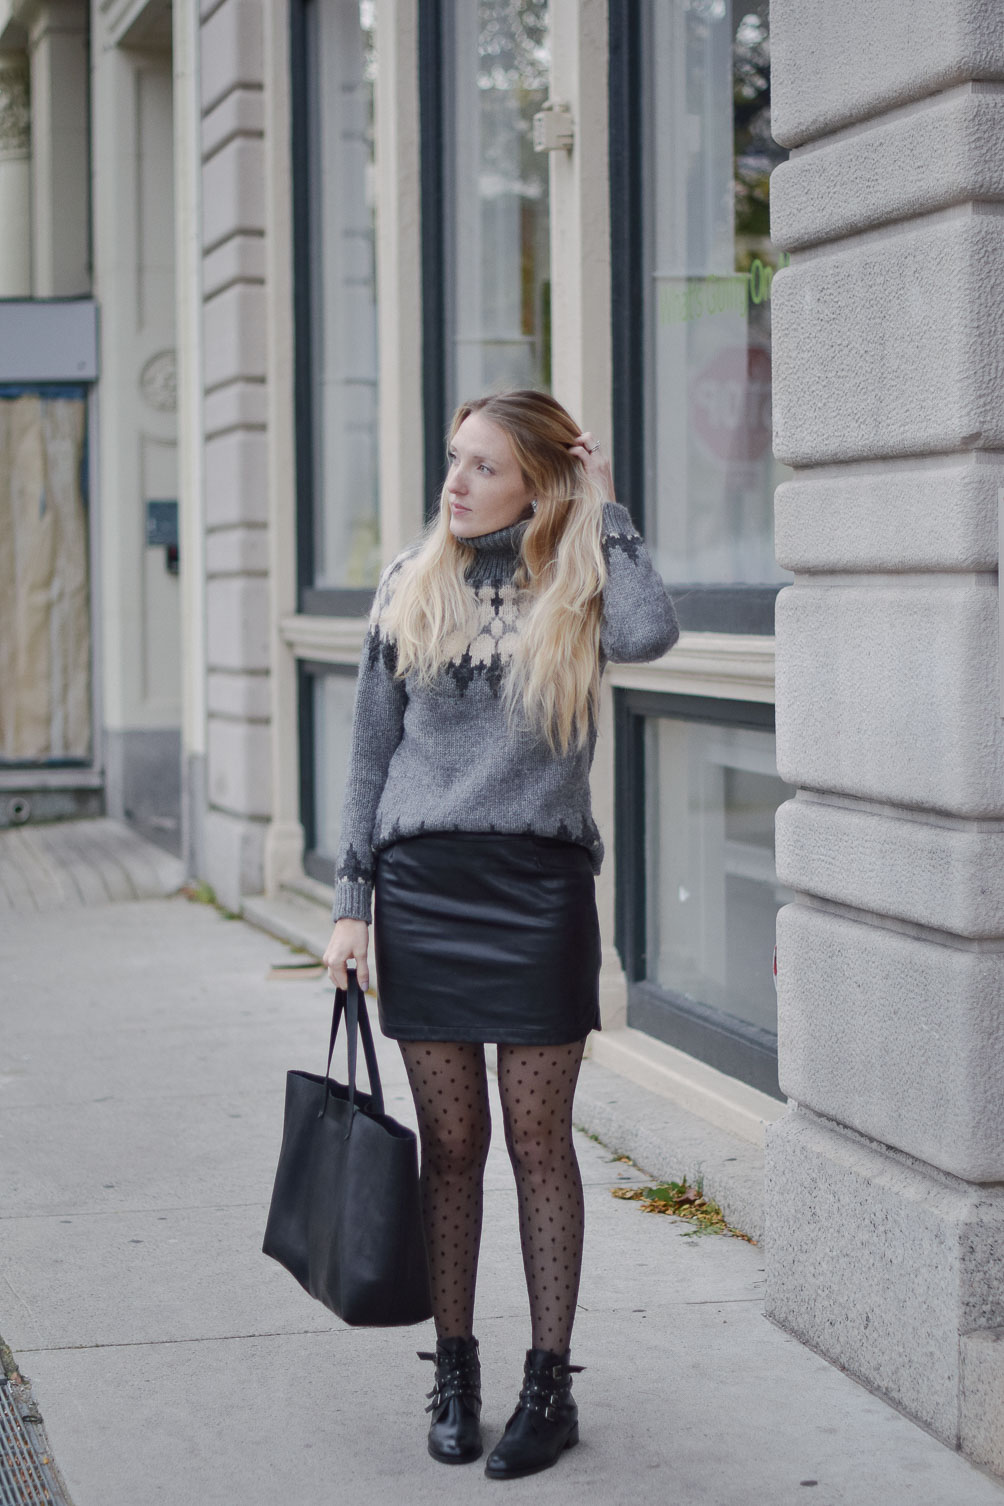 fashion blogger Leslie Musser pulling off statement tights in a cozy winter outfit